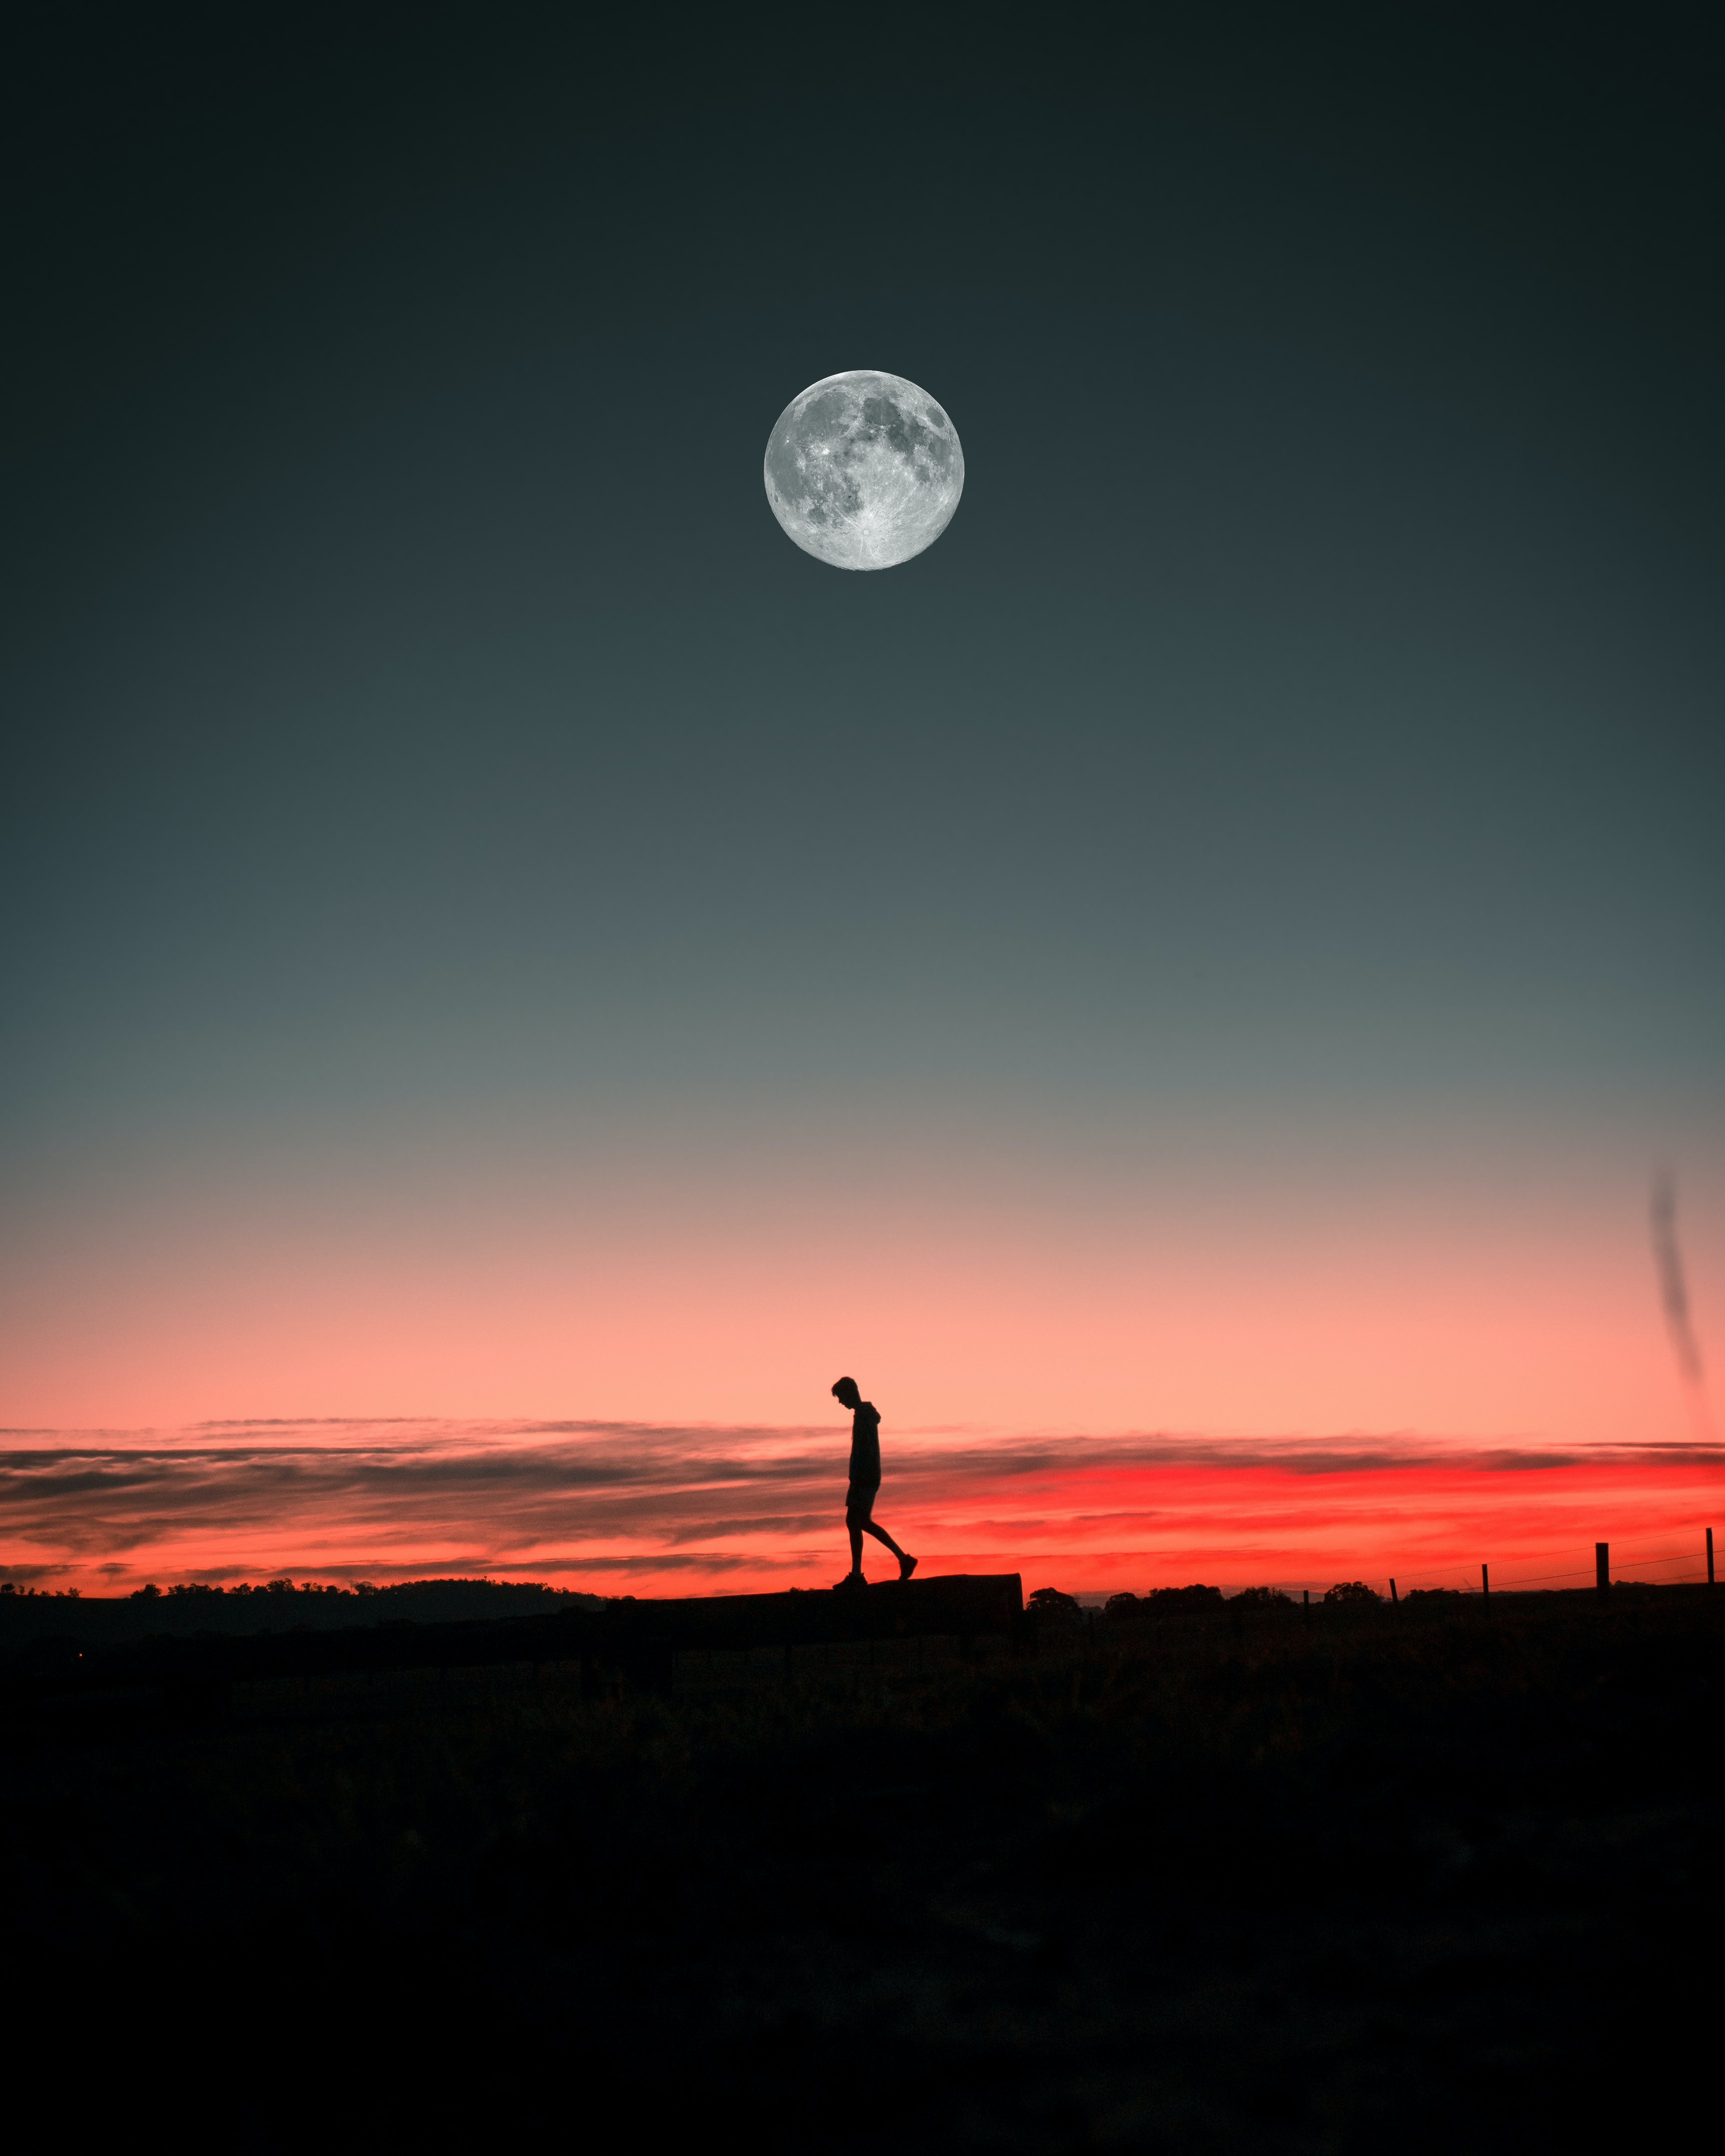 moon, alone, lonely, sunset, loneliness, silhouette, miscellanea, miscellaneous